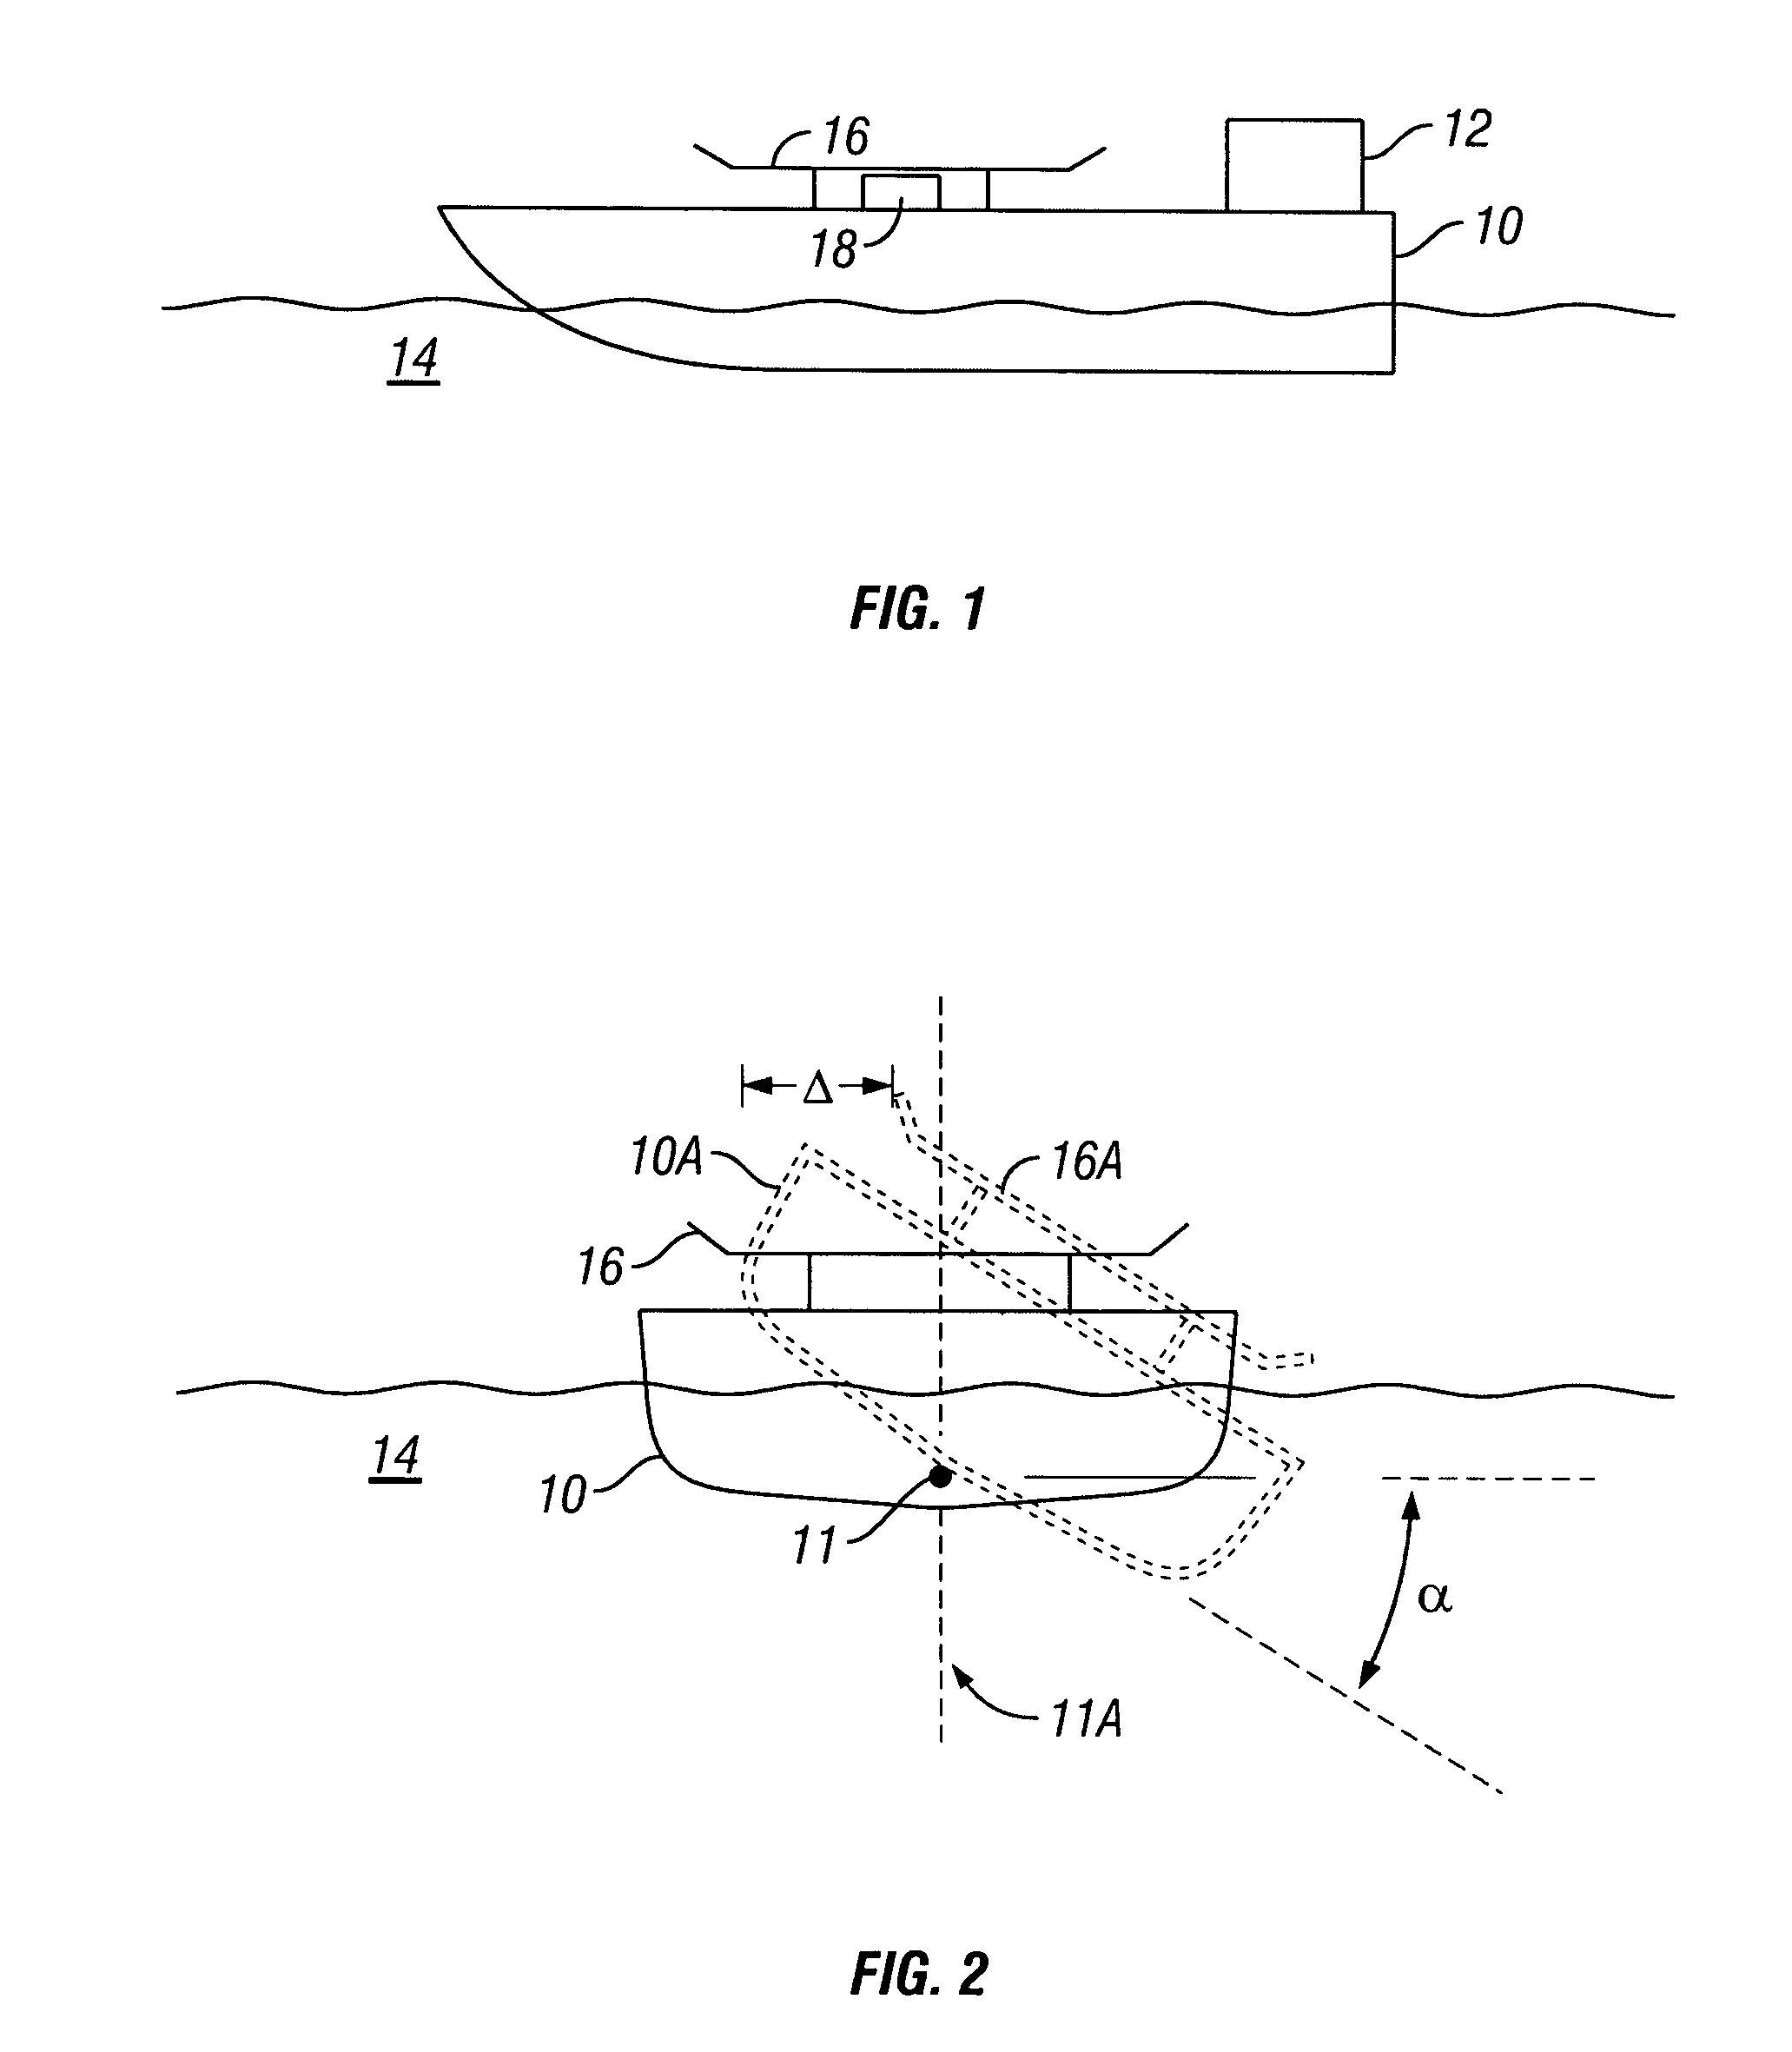 Helicopter landing platform having motion stabilizer for compensating ship roll and/or pitch